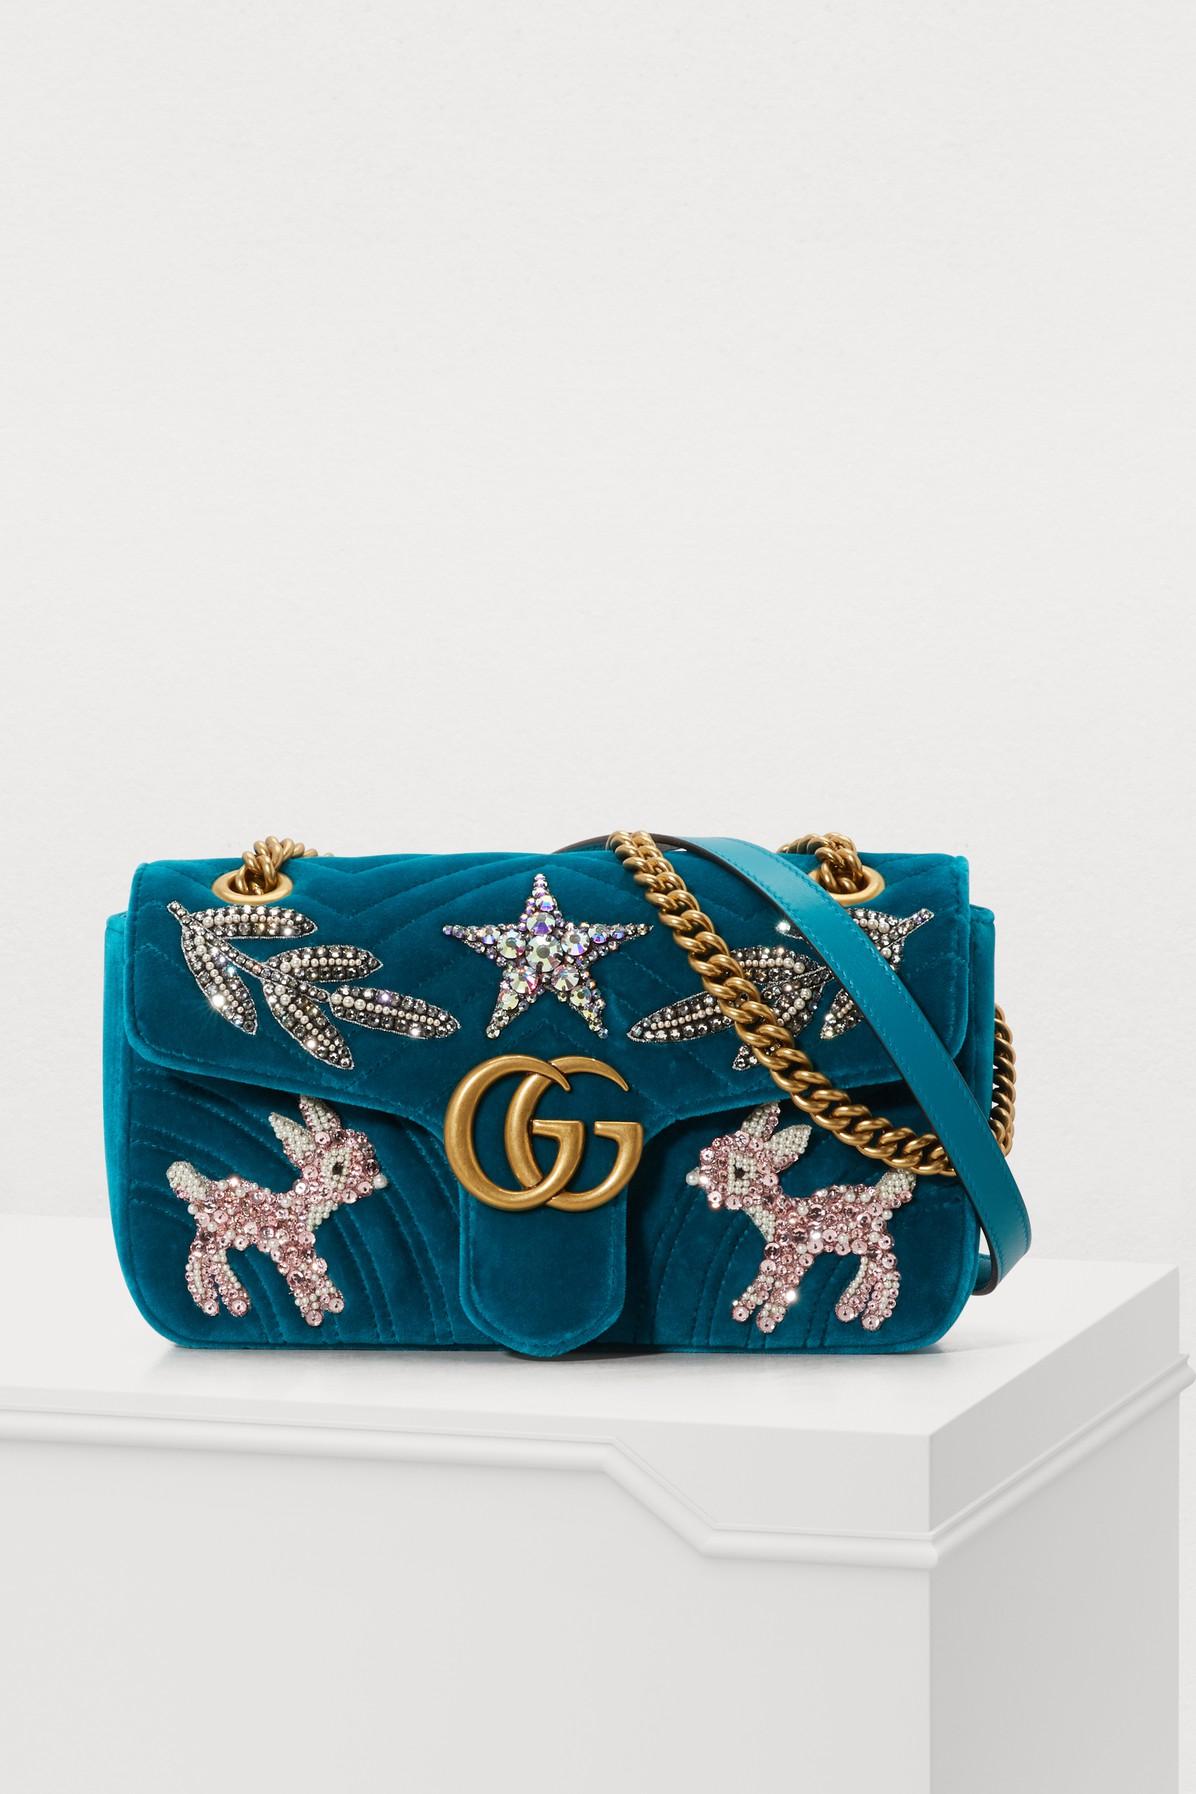 Gucci Marmont Patch Velvet Bag in Blue | Lyst